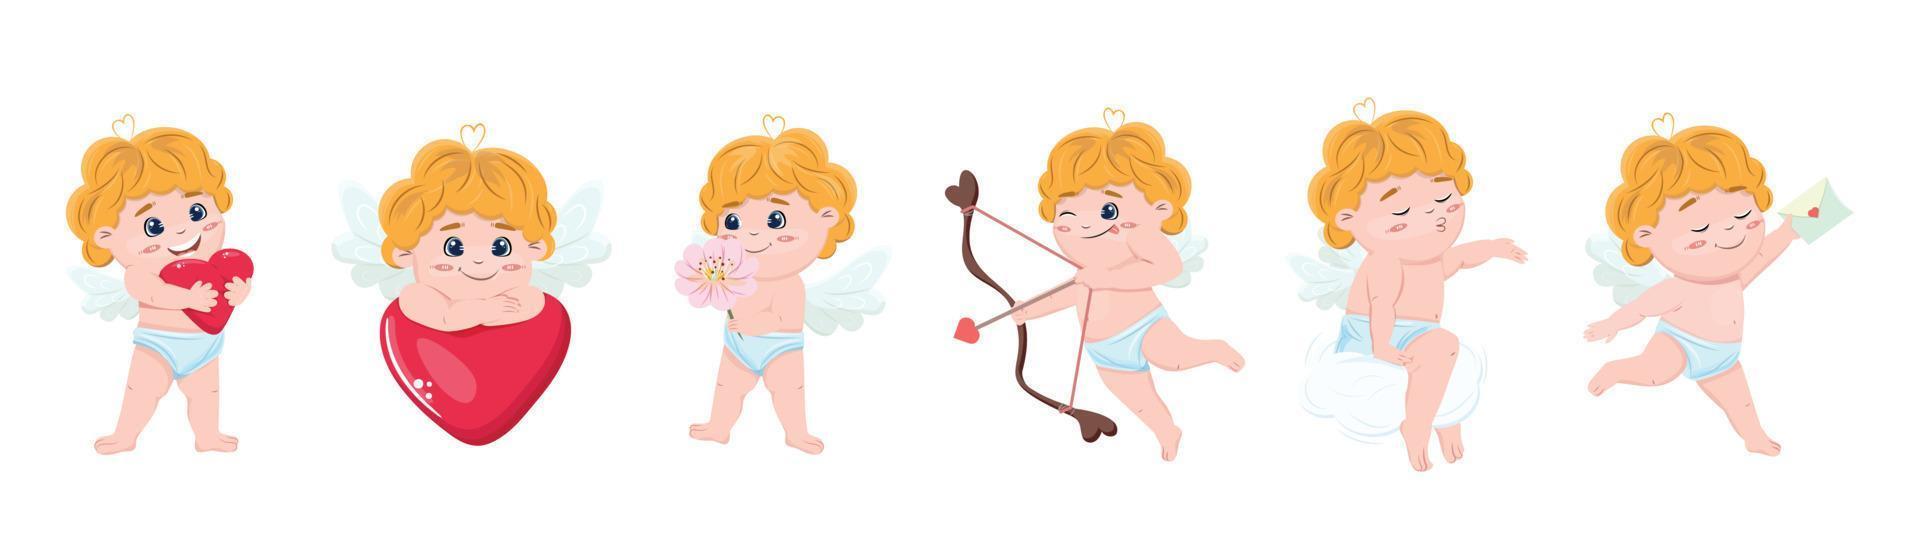 Cupids collection in flat style. Cute group of cupids in love vector